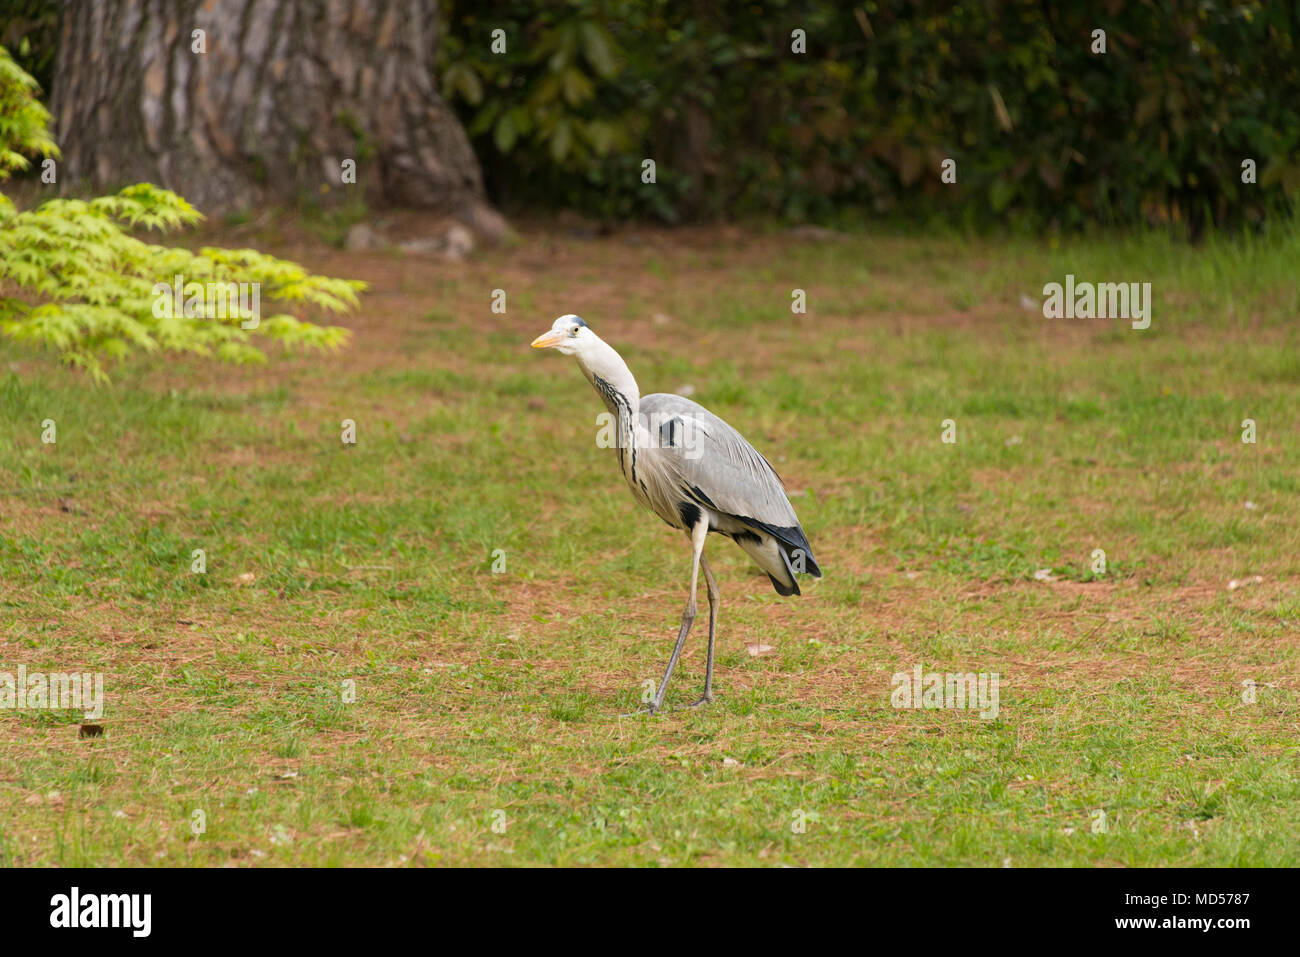 Grey Heron in Imperial Palace Gardens, Kyoto, Japan. Stock Photo